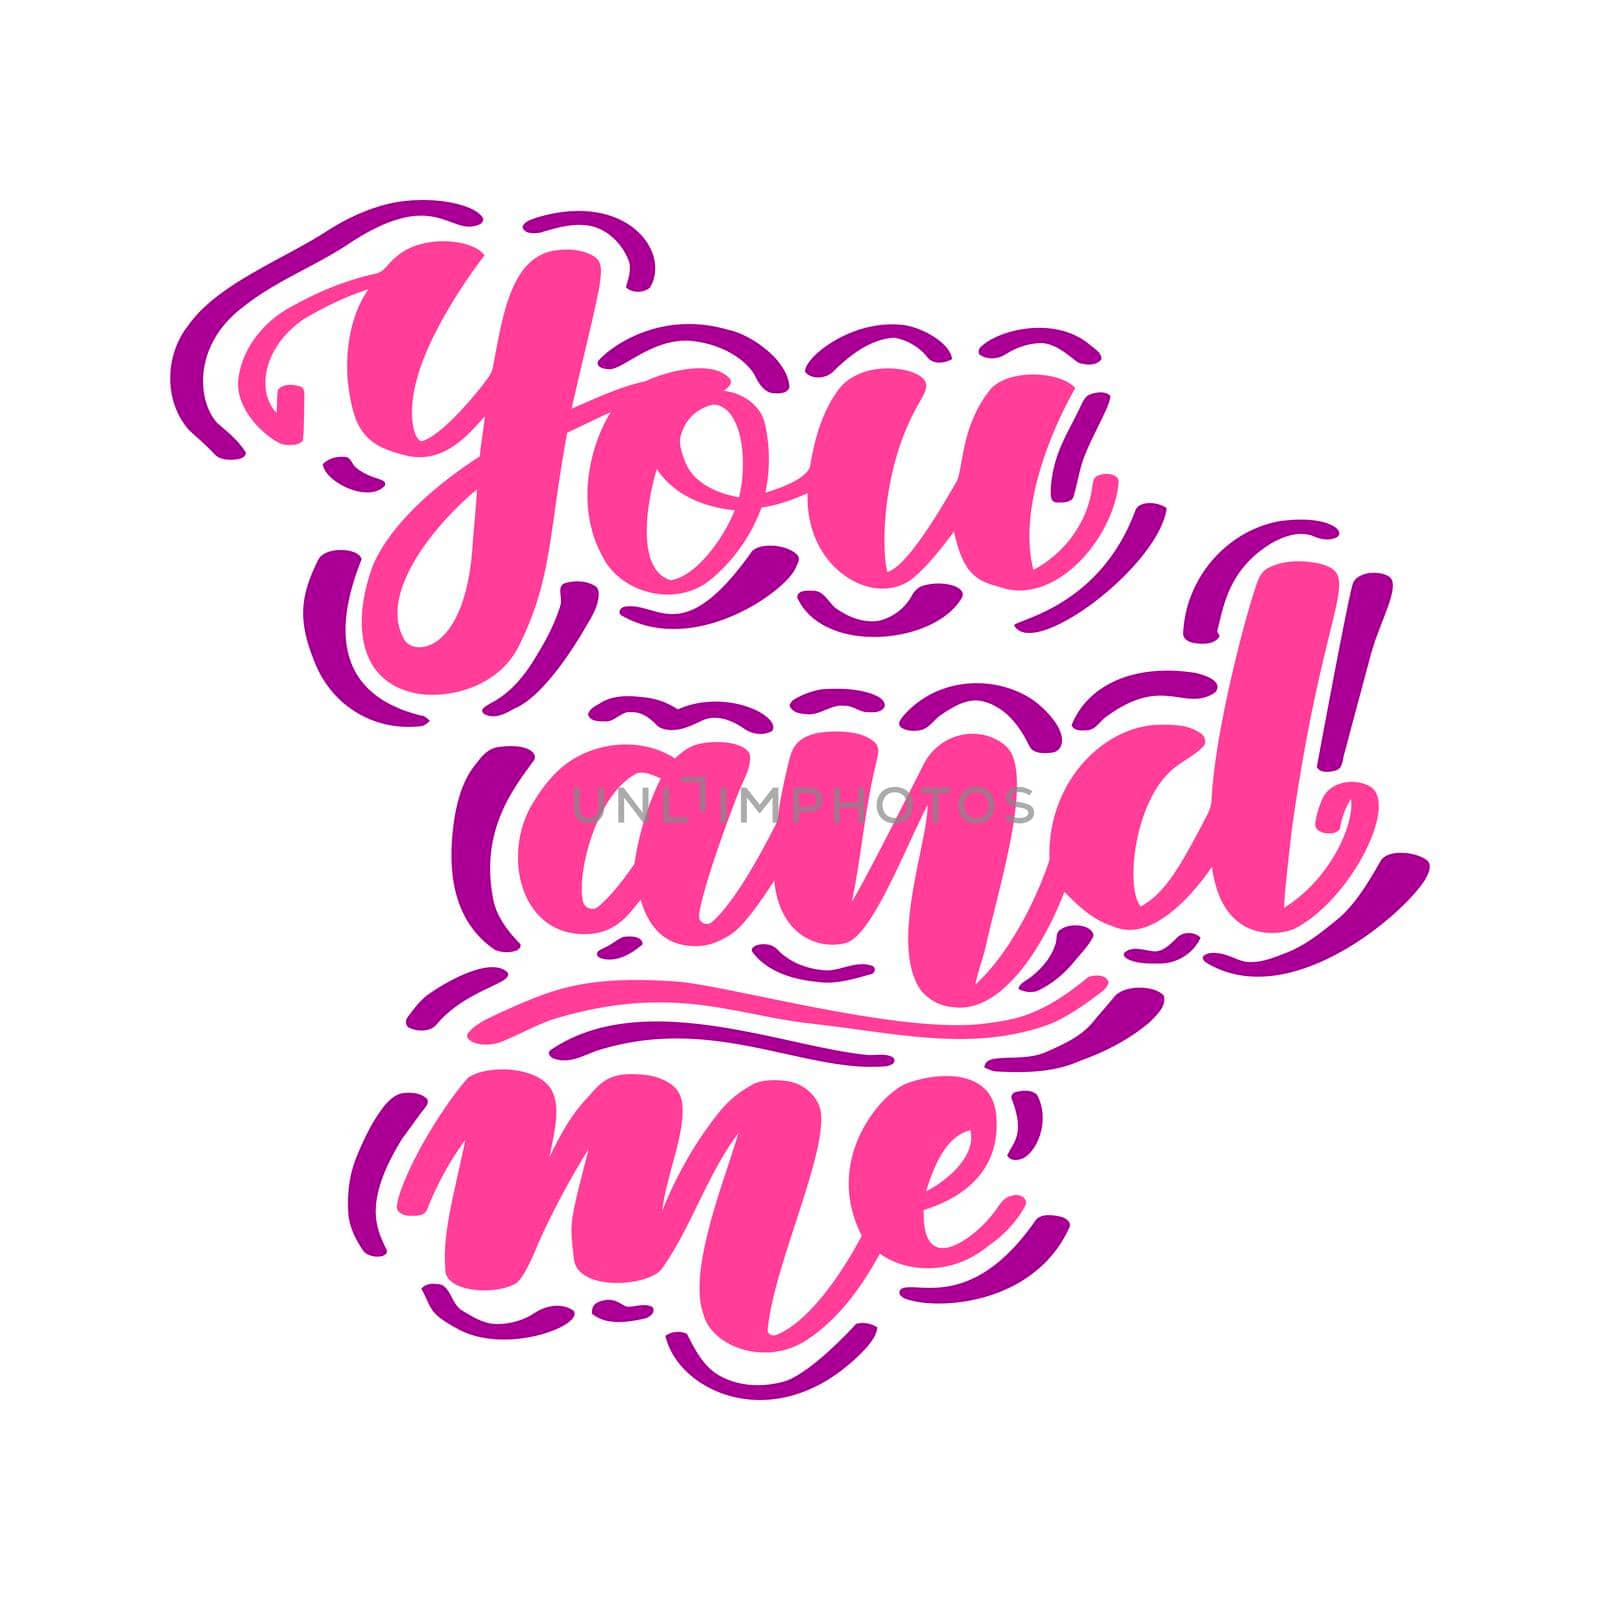 You and me. Romantic handwritten lettering isolated on white background. illustration for posters, cards, print on t-shirts and much more by Marin4ik